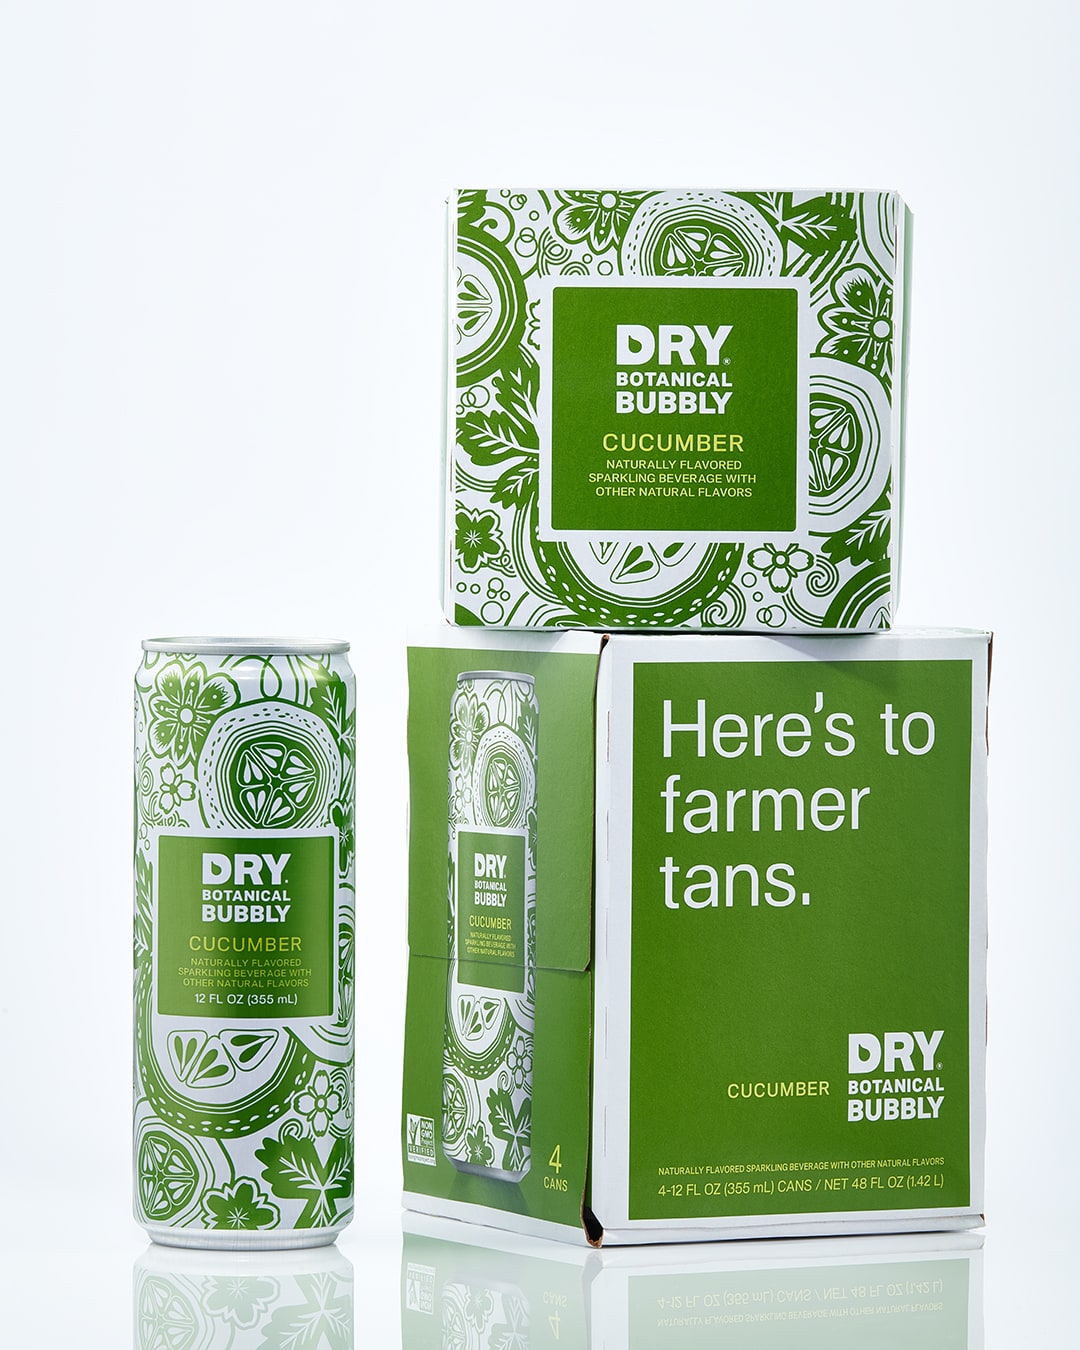 Dry Botanical Bubbly soda can and packaging design cucumber flavor